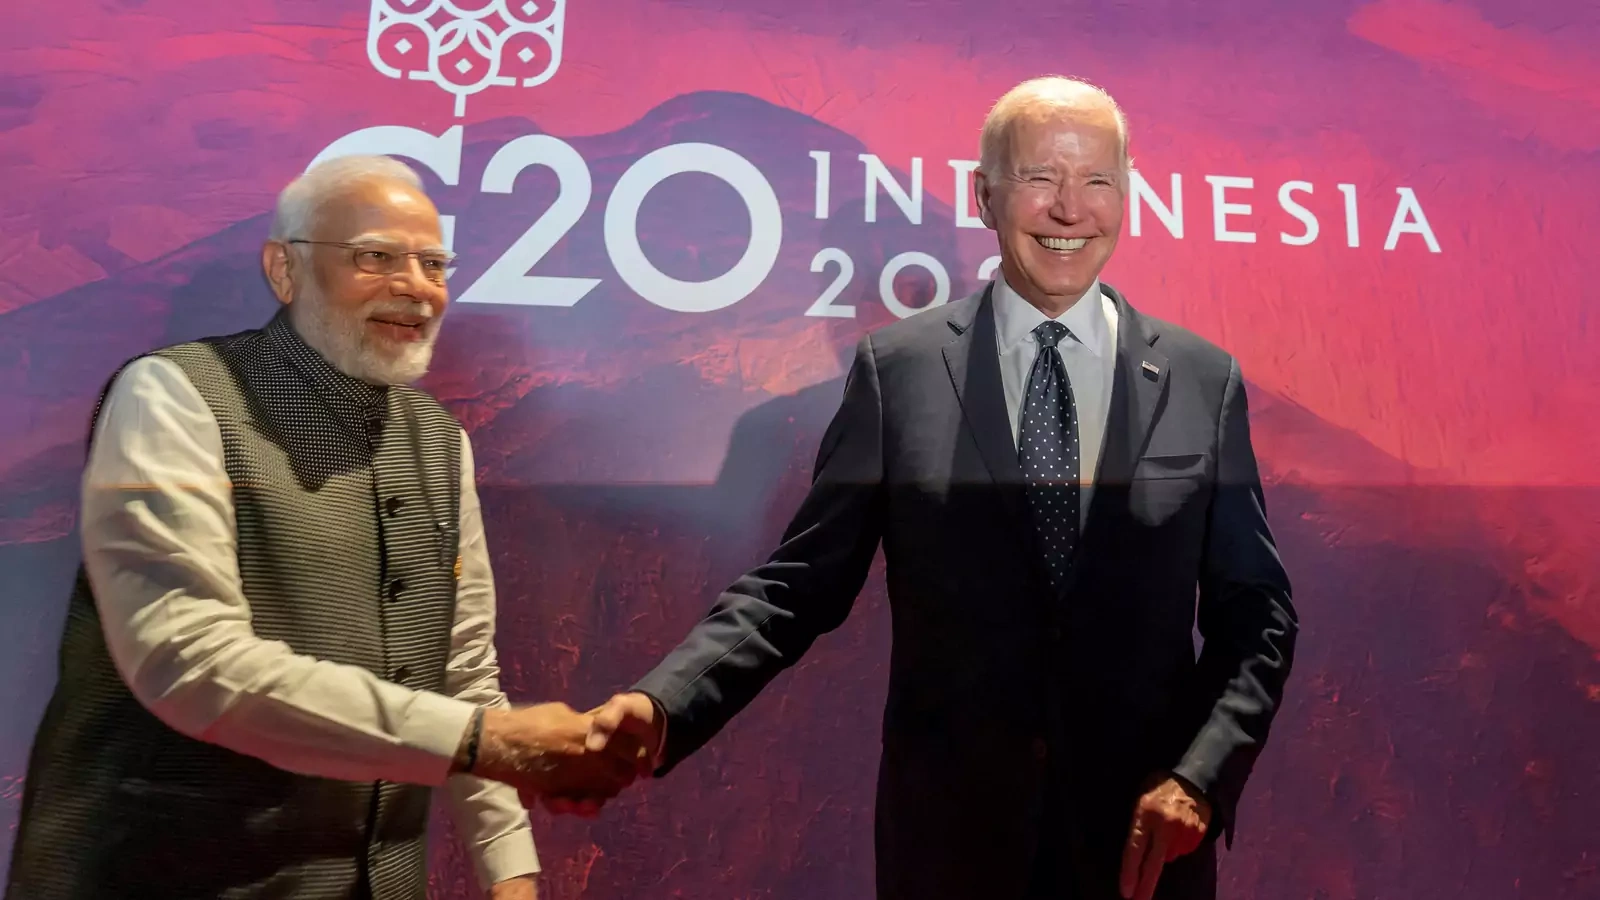 President Joe Biden, right, shakes hands with India's Prime Minister Narendra Modi before the Partnership for Global Infrastructure and Investment meeting at the G20 summit in Indonesia.